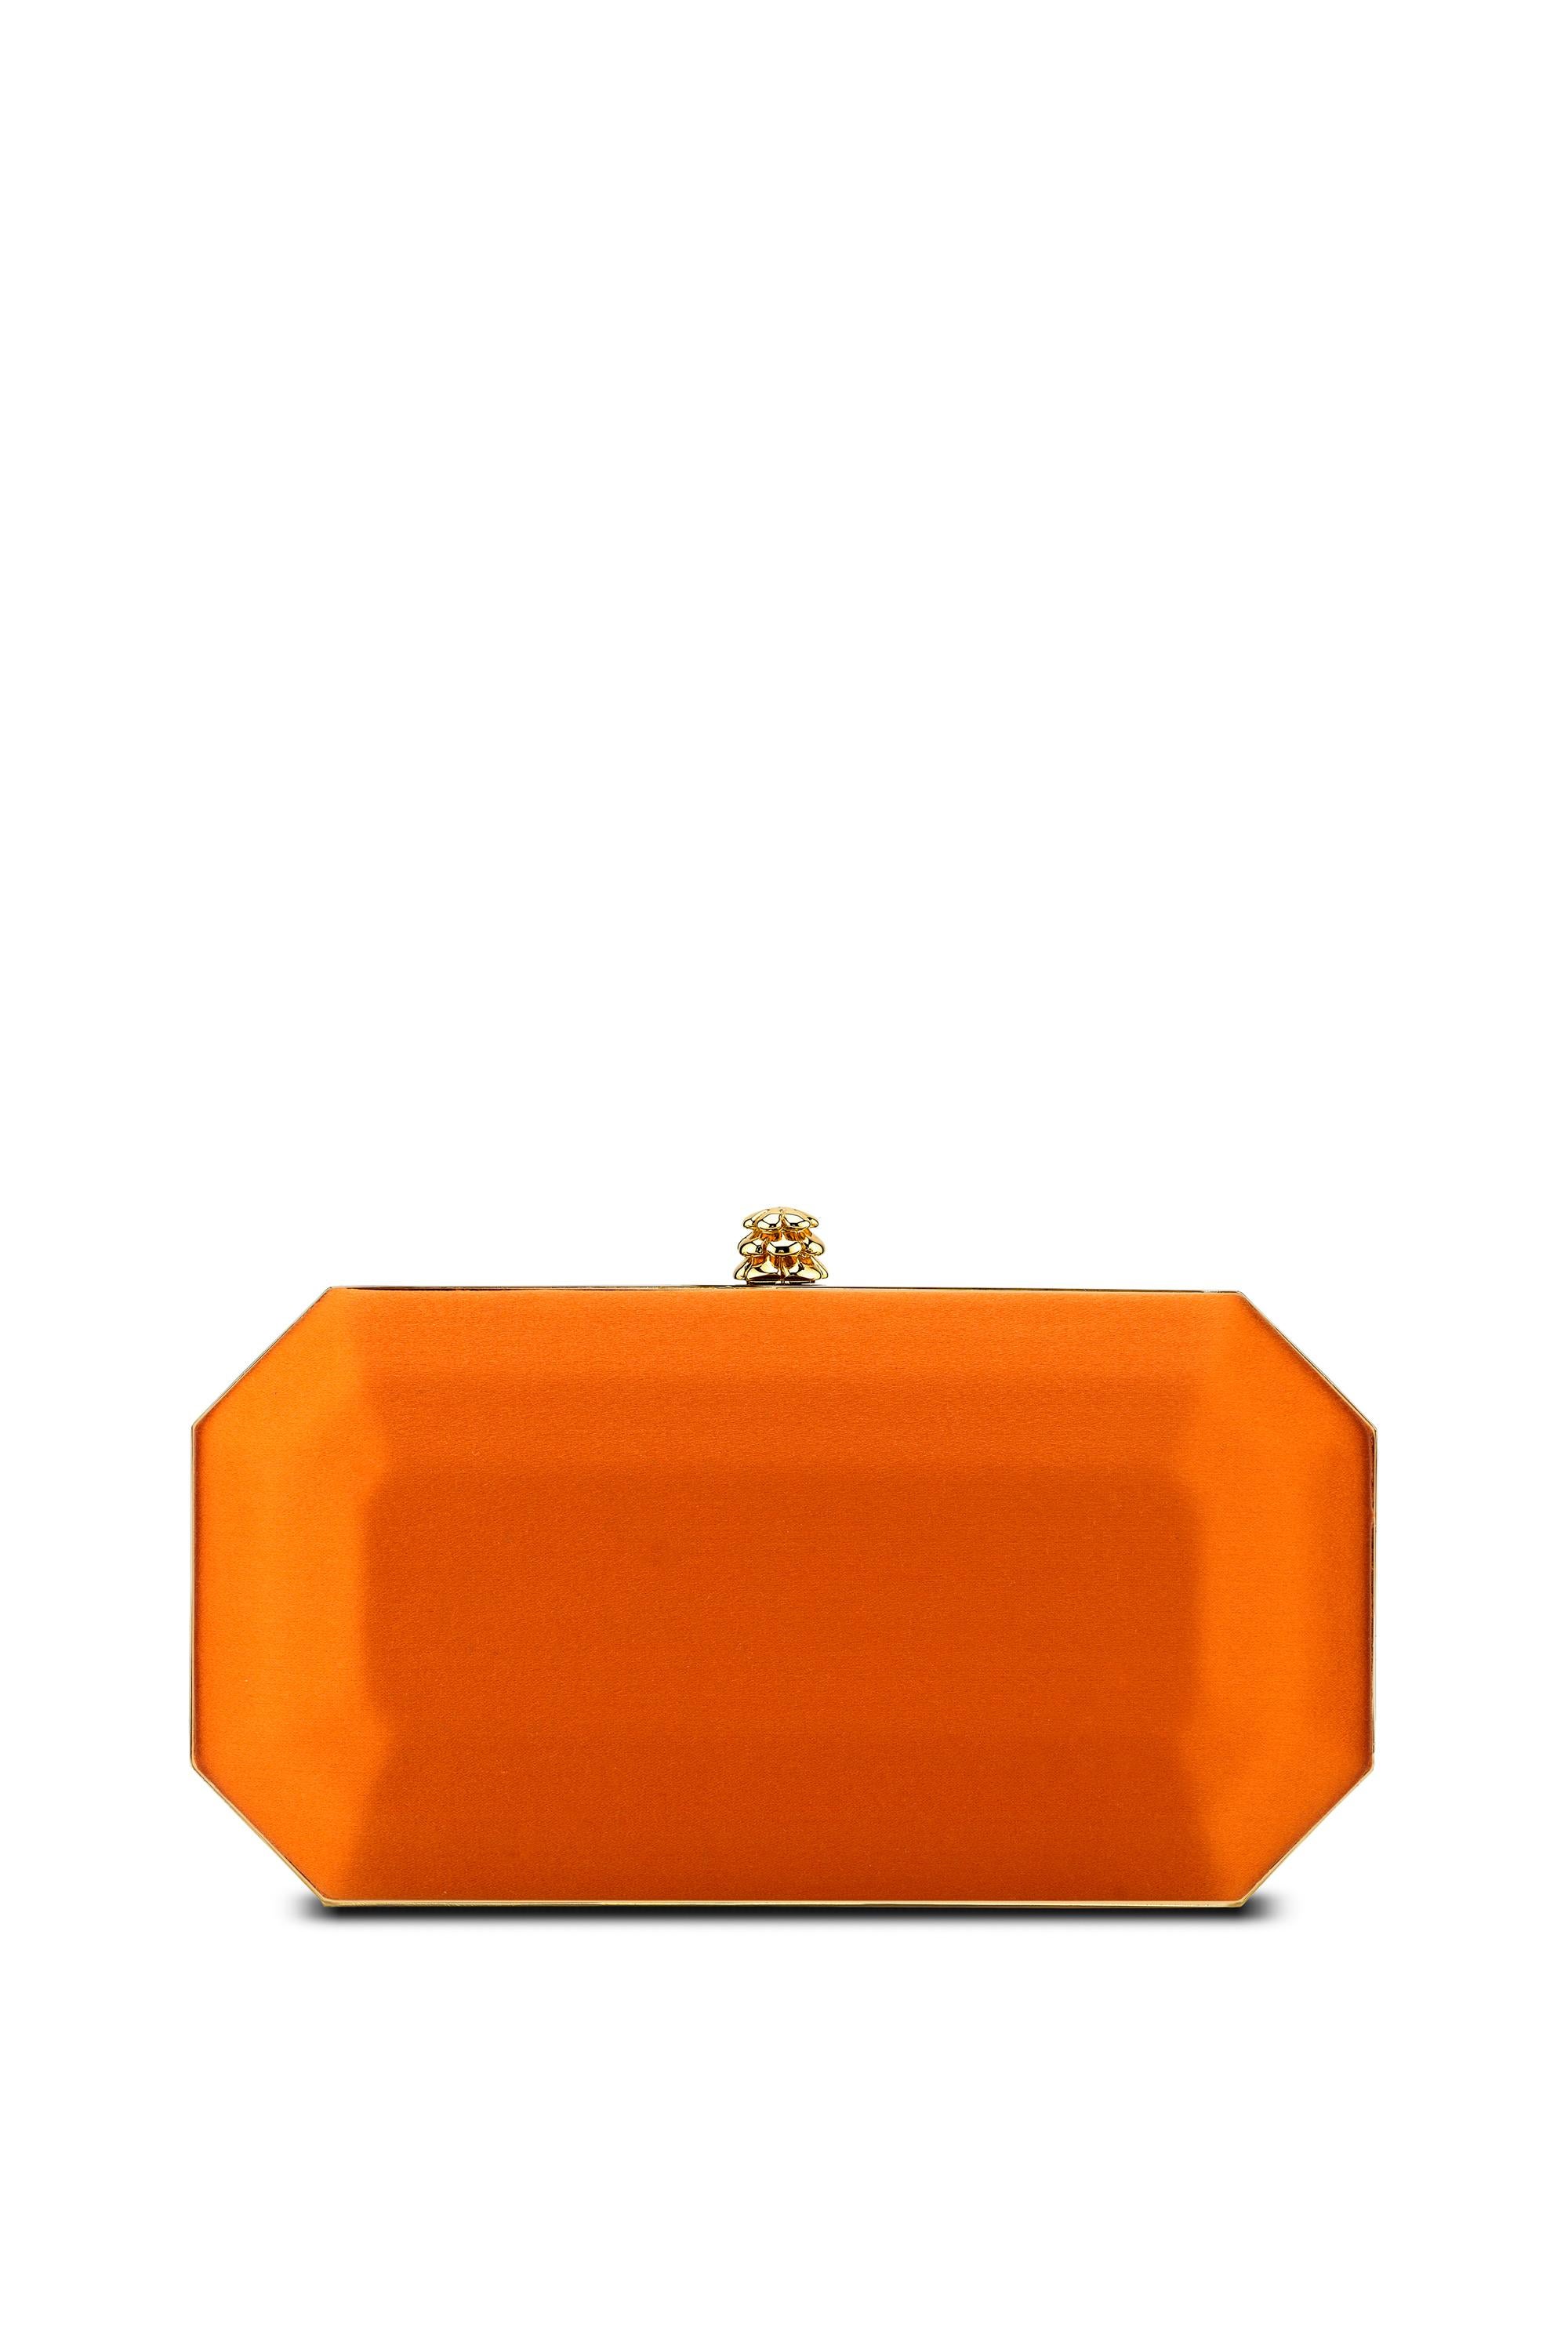 The Perry Small is featured in our Tiger Orange satin with gold hardware. The Perry is a hard-framed clutch designed with interior pockets and an optional gold cross-body chain. It's elegant emerald shape is inspired by Tyler's own engagement ring